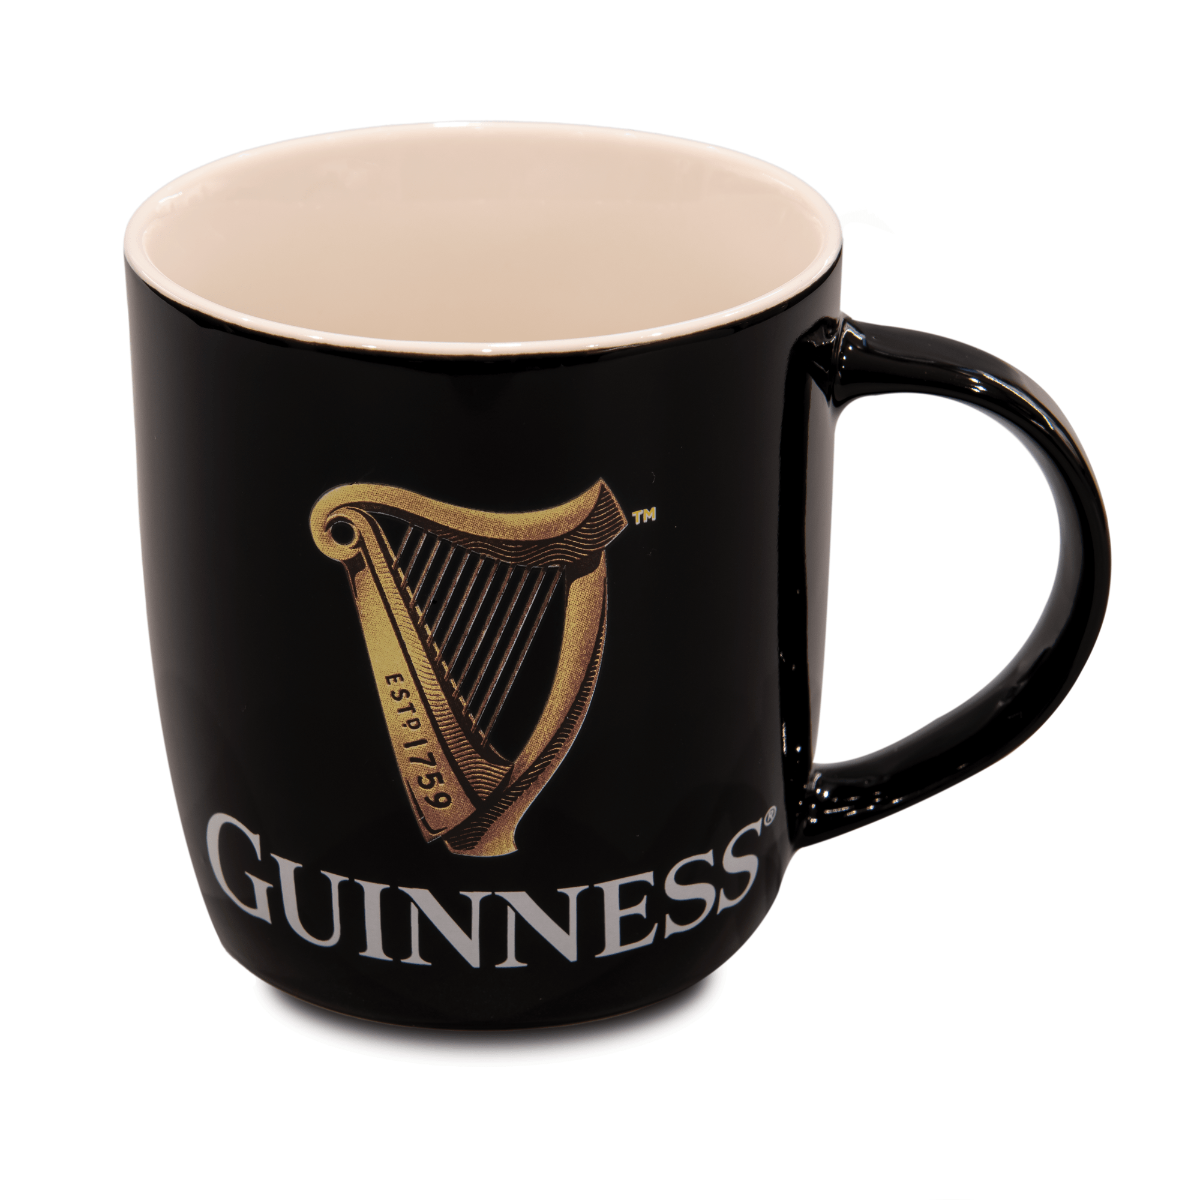 A Guinness Toucan Mug Set, featuring a Toucan design, is shown on a white background.